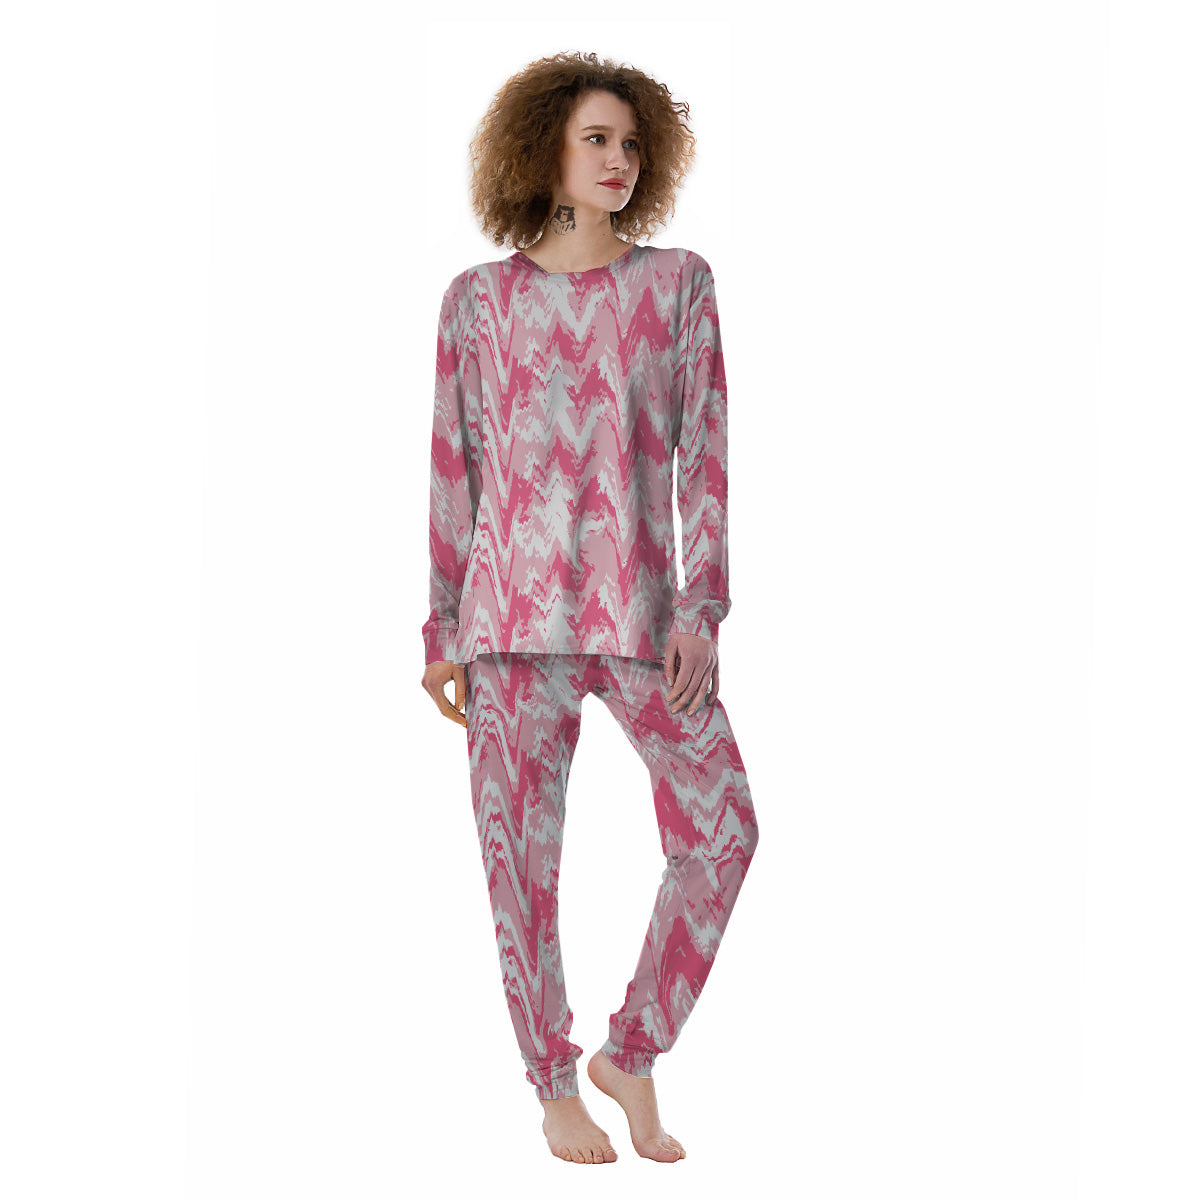 Zigzag Abstract Stripes Pink Print Pattern Women's Pajamas-grizzshop